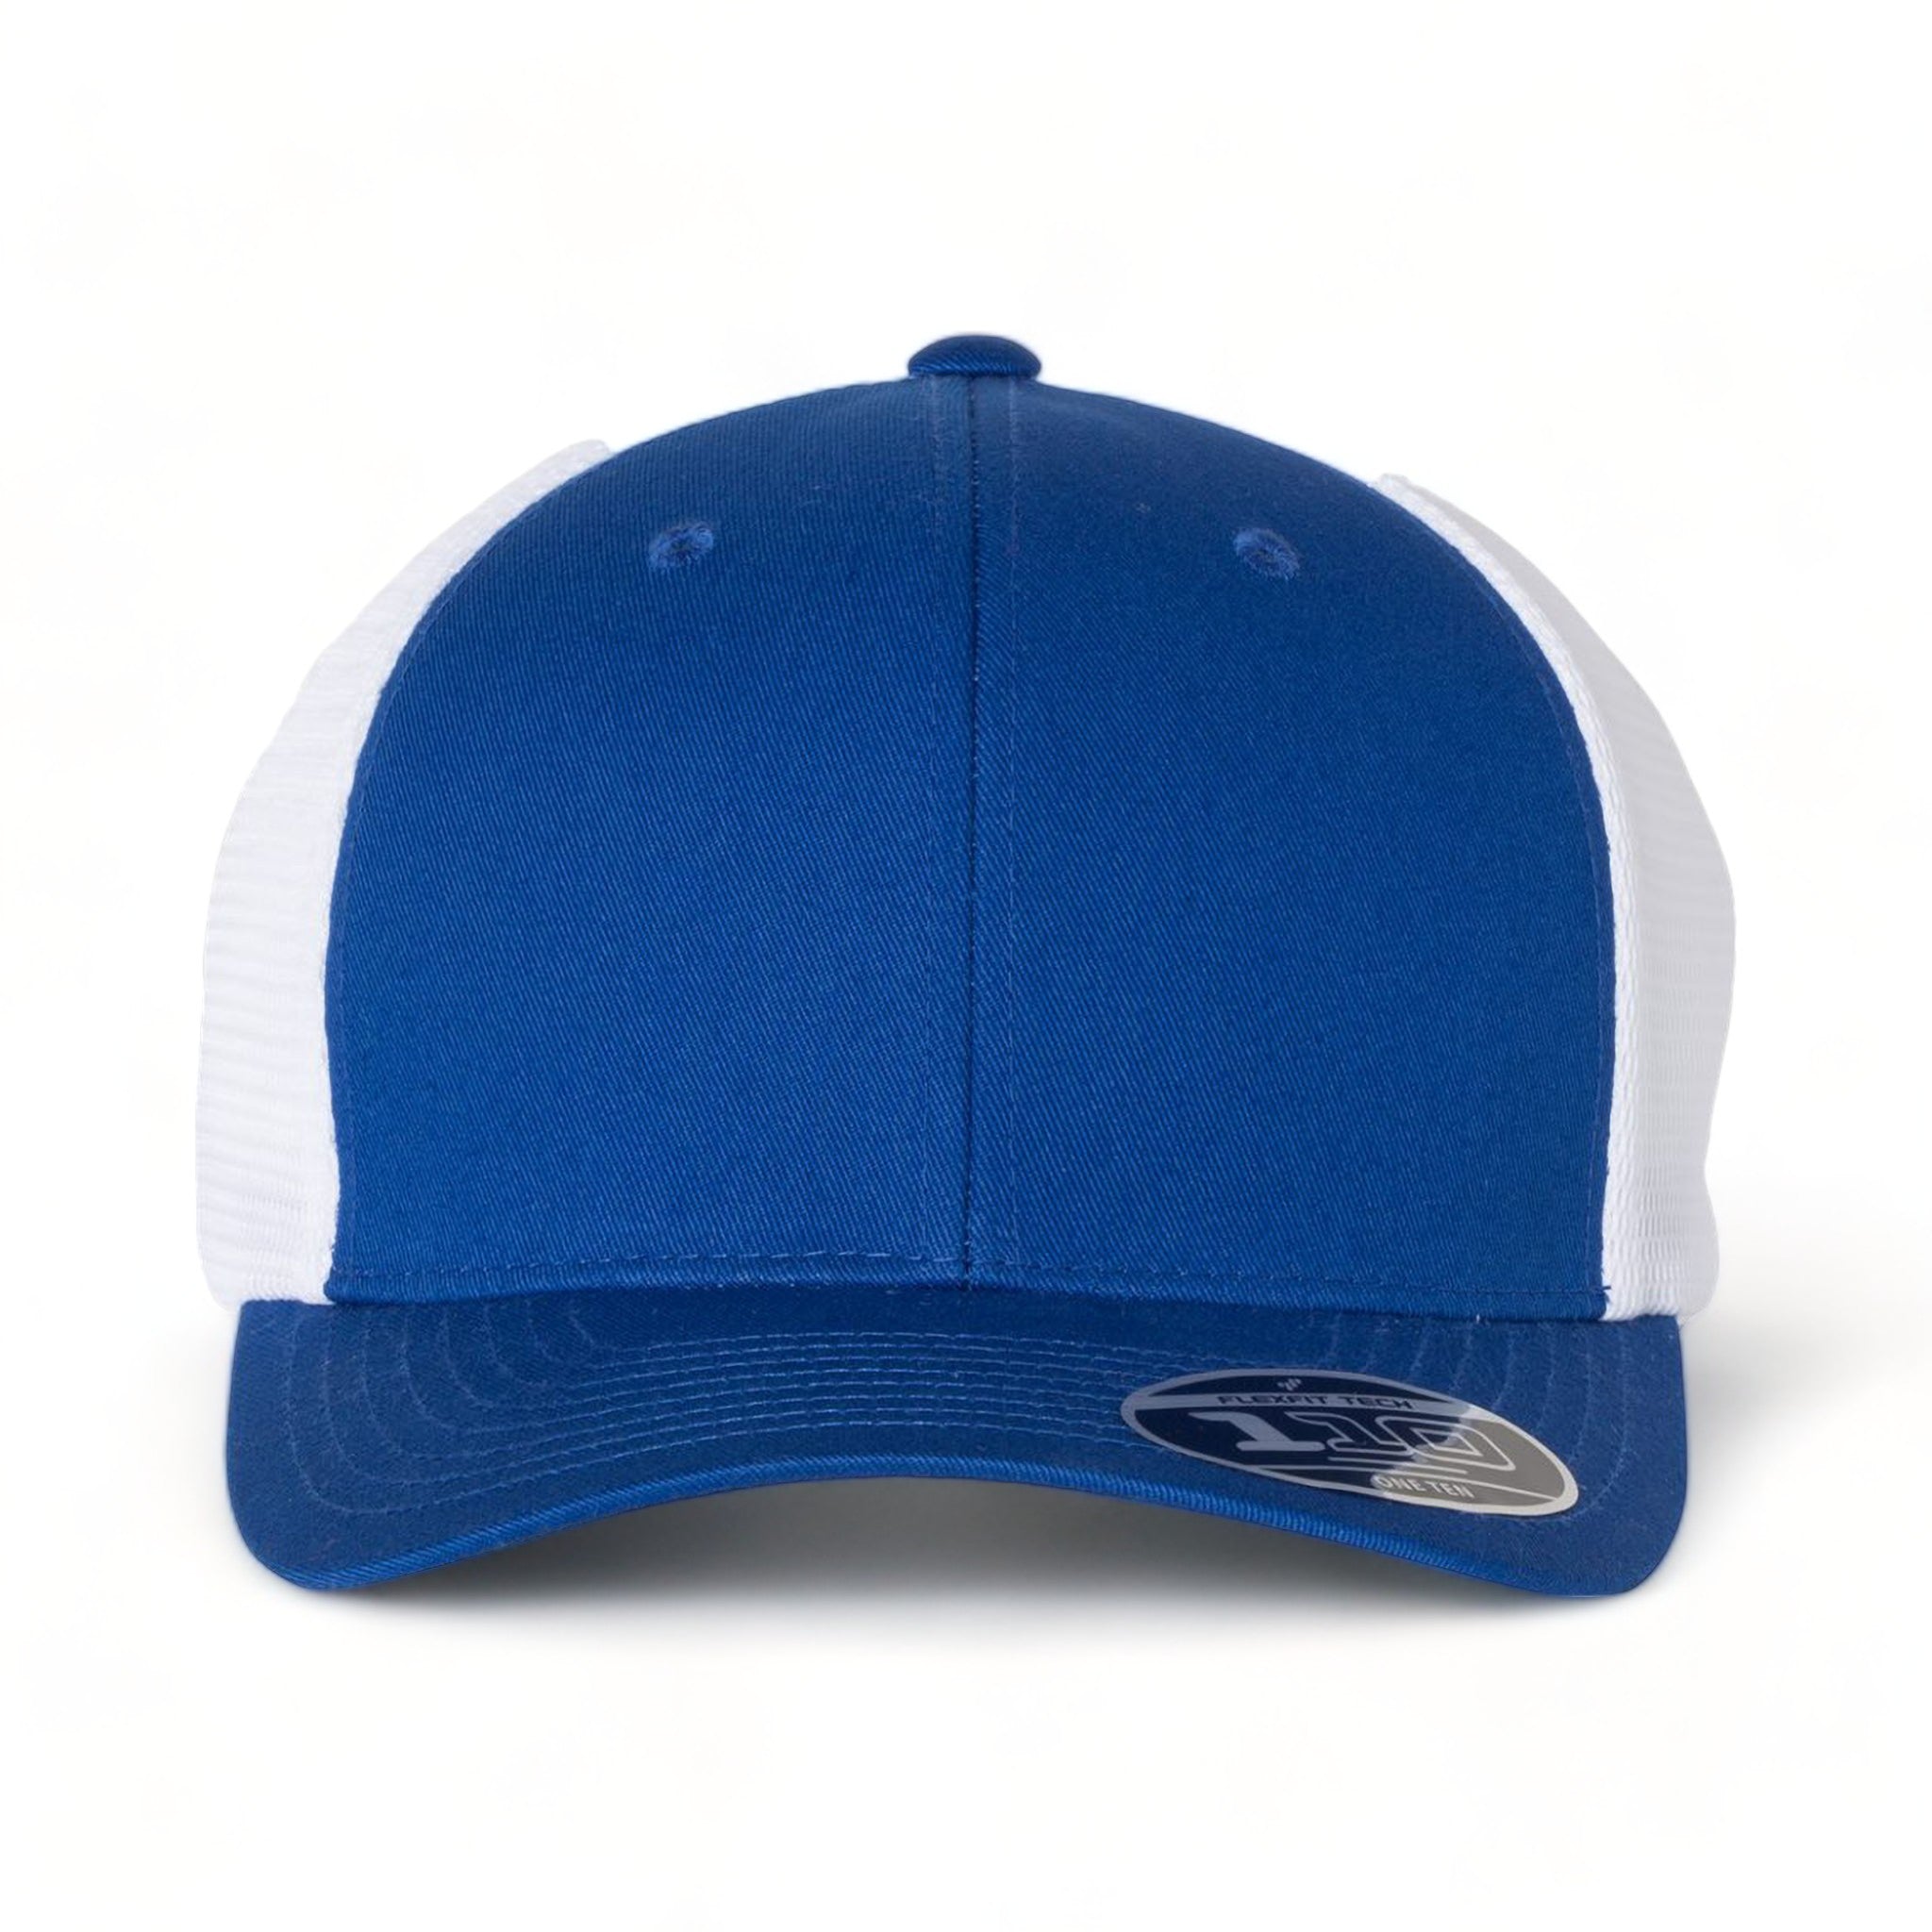 Front view of Flexfit 110M custom hat in royal and white